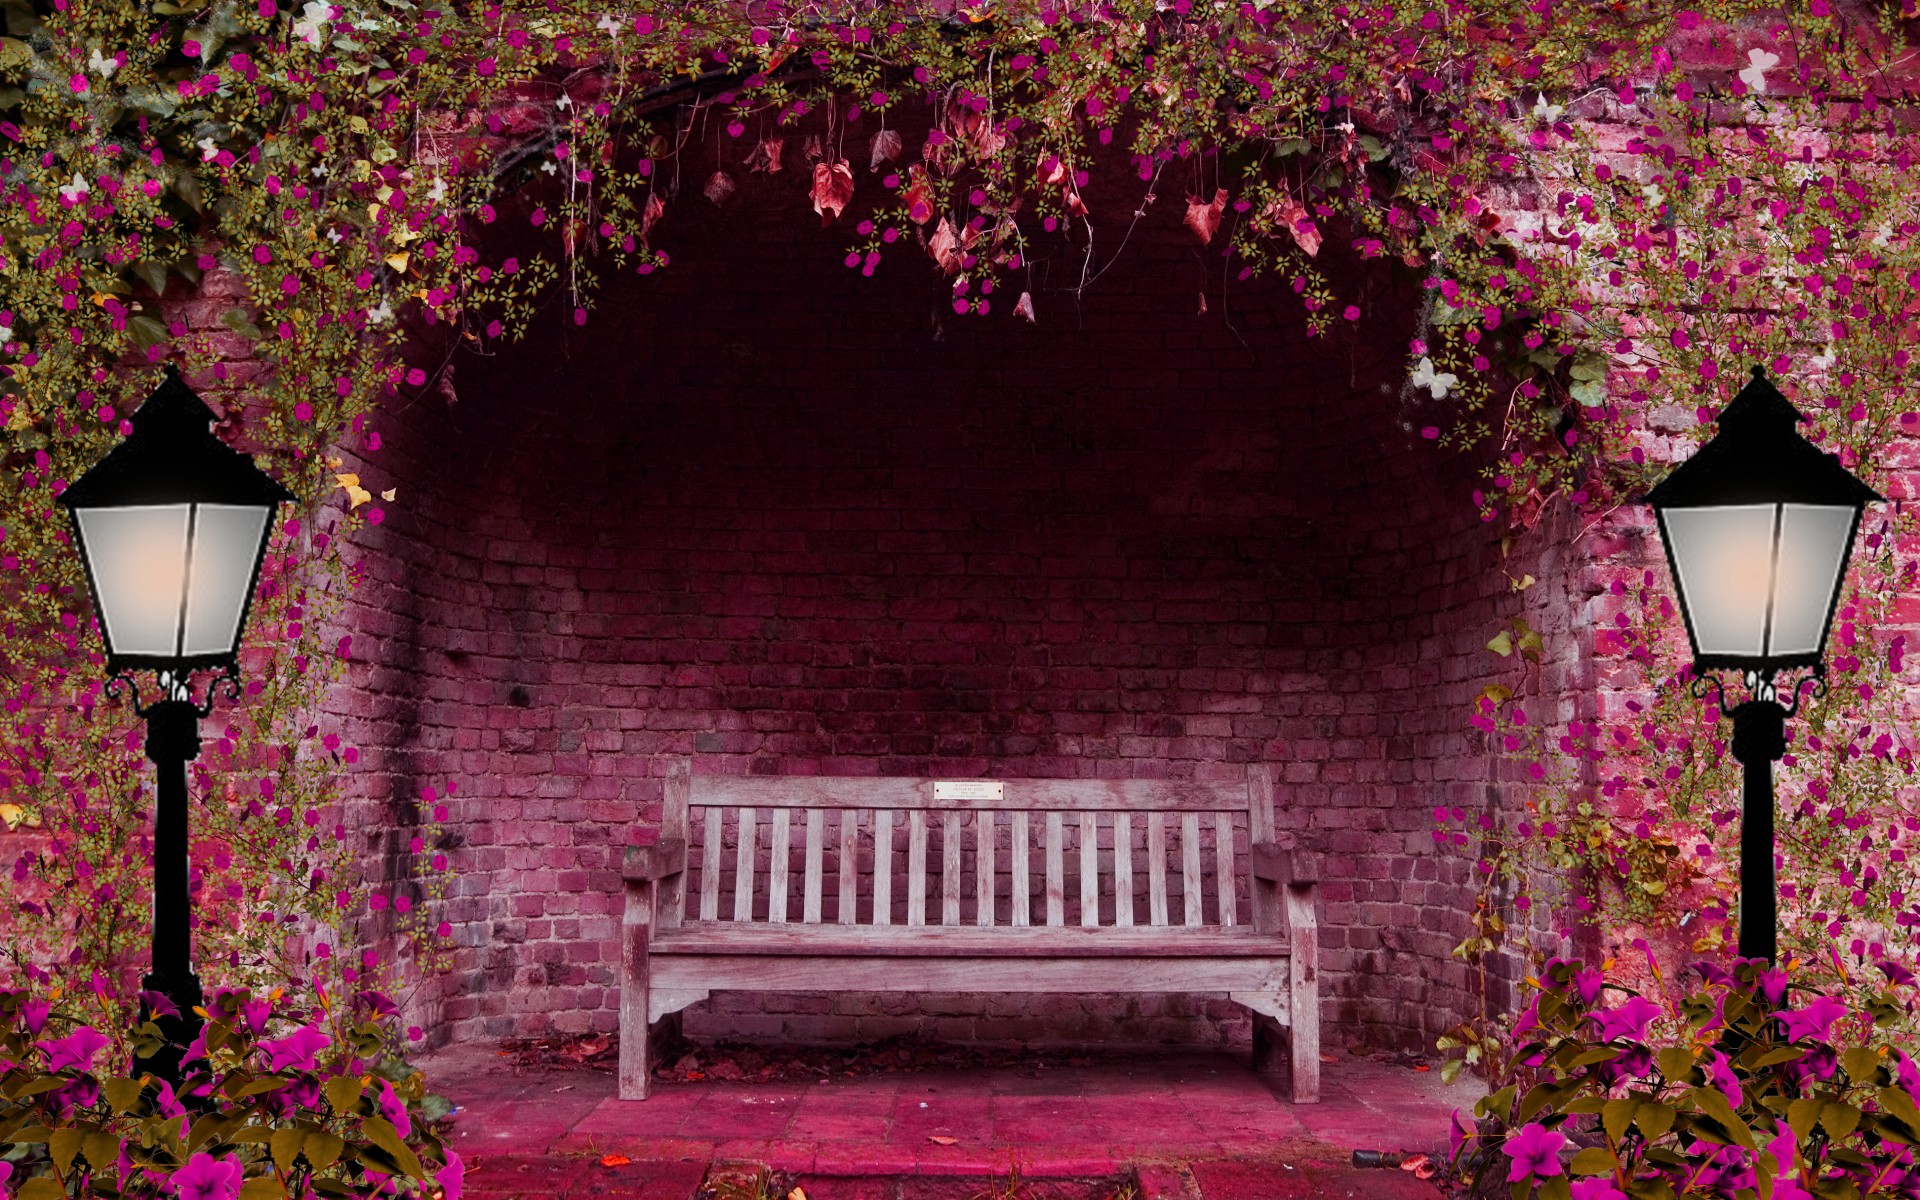 spring, Garden, Flowers, Arch, Bench, Lights, Pink, Lamps, Brick